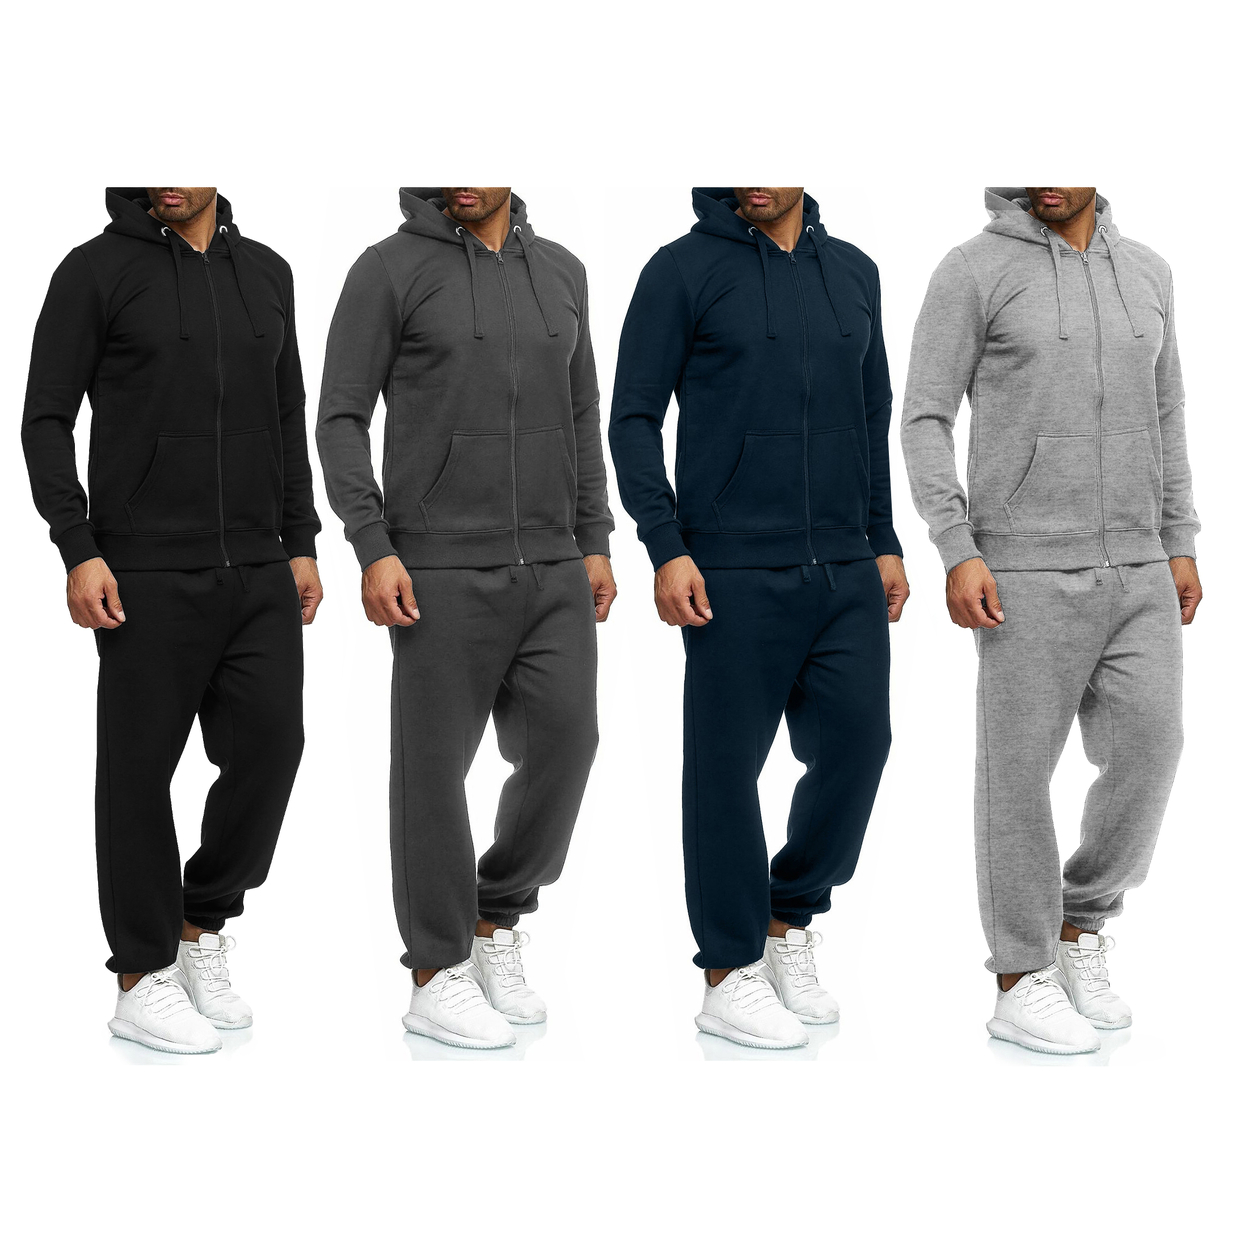 Multi-Pack: Men's Casual Big & Tall Athletic Active Winter Warm Fleece Lined Full Zip Tracksuit Jogger Set - Grey, 1-pack, 3xl